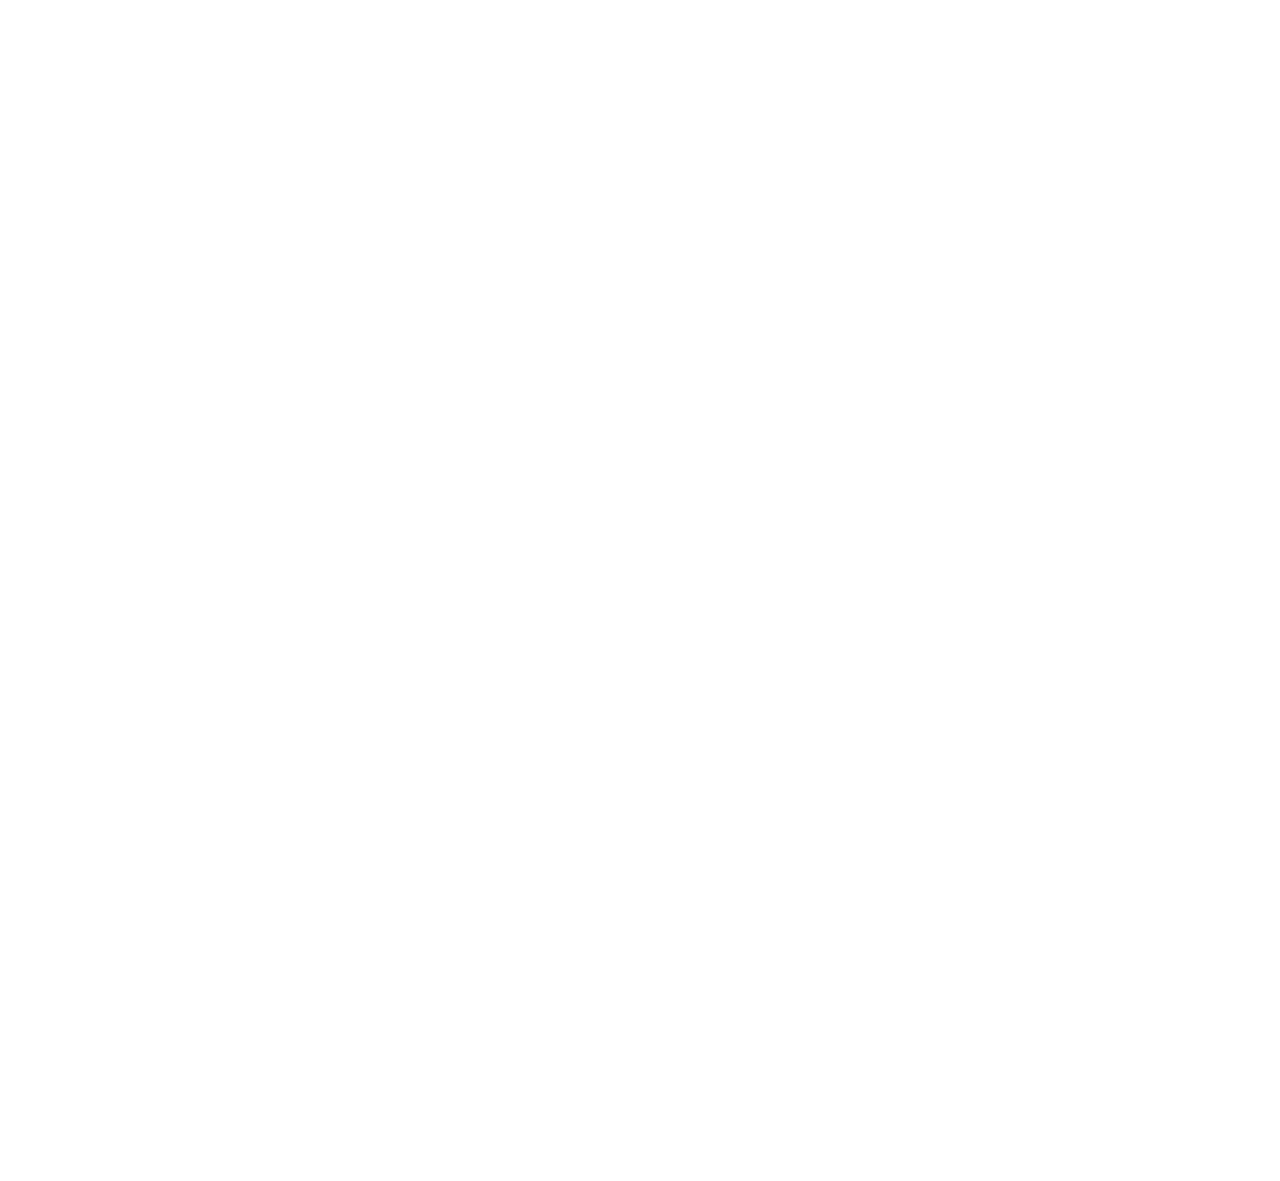 Beach Life Window Cleaning's web page